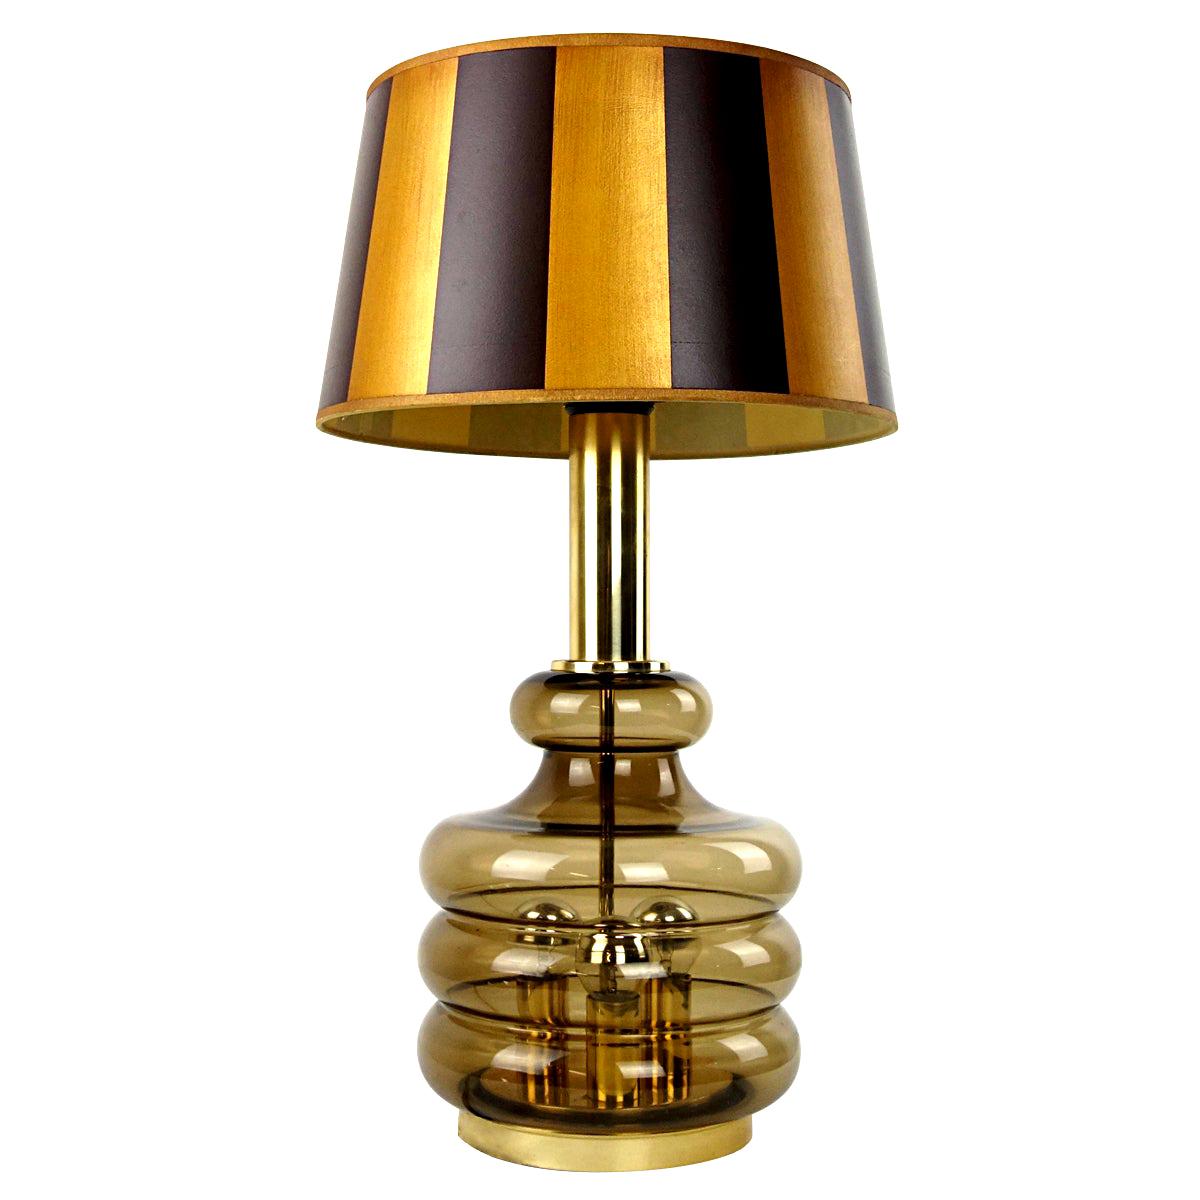 Mid Century Modern Silver Colored Mushroom Shaped Table Lamp By Doria For Sale At 1stdibs